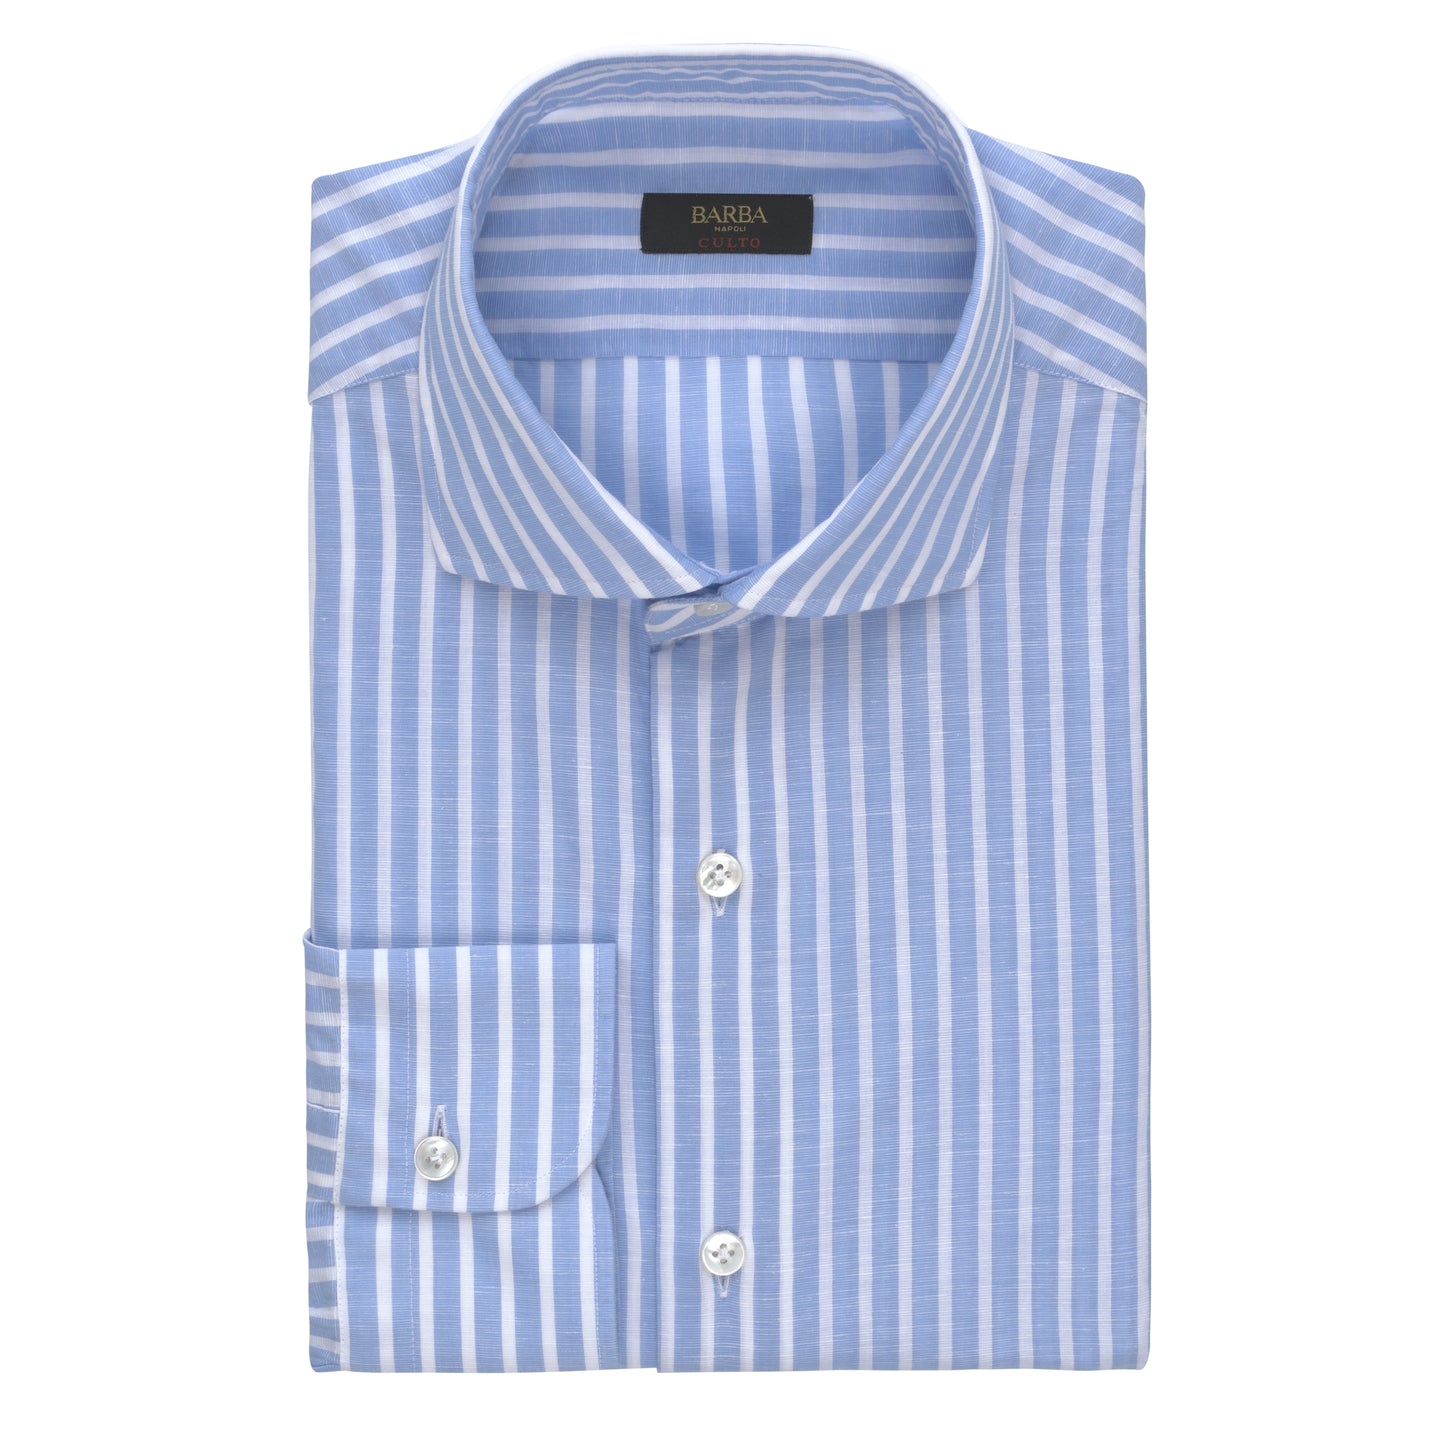 Striped Cotton-Linen Blend Shirt in Light Blue and White